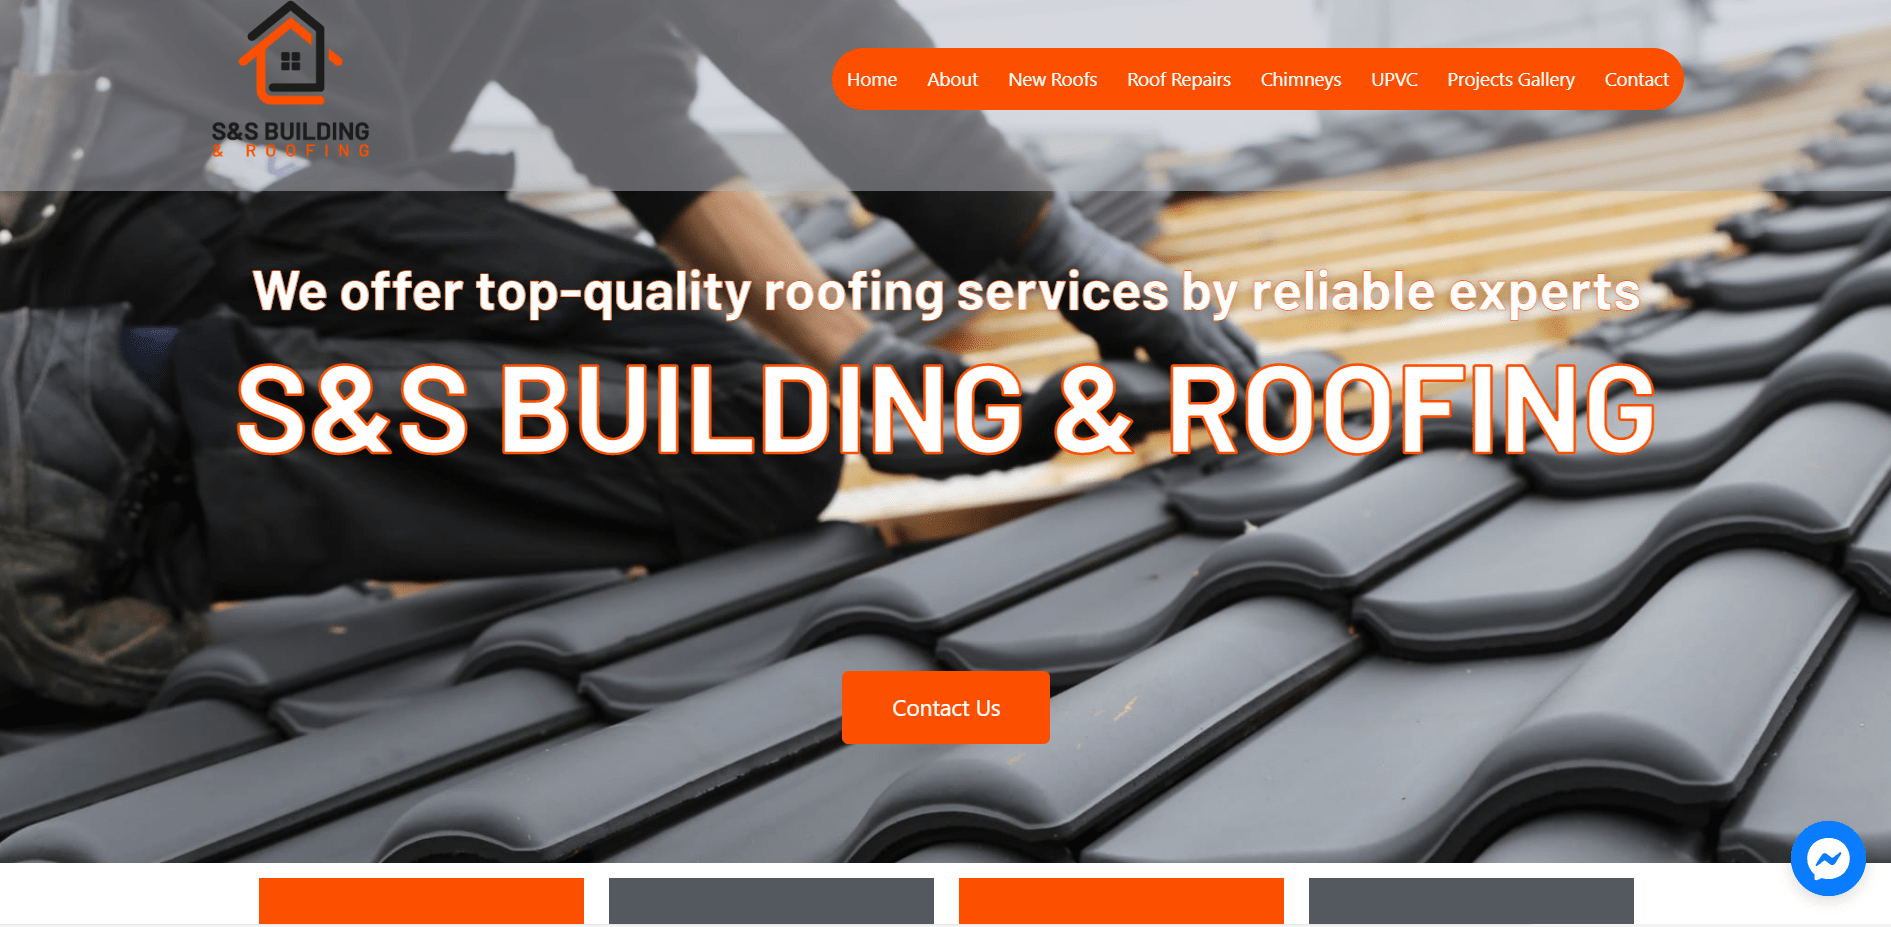 S & S Building & Roofing